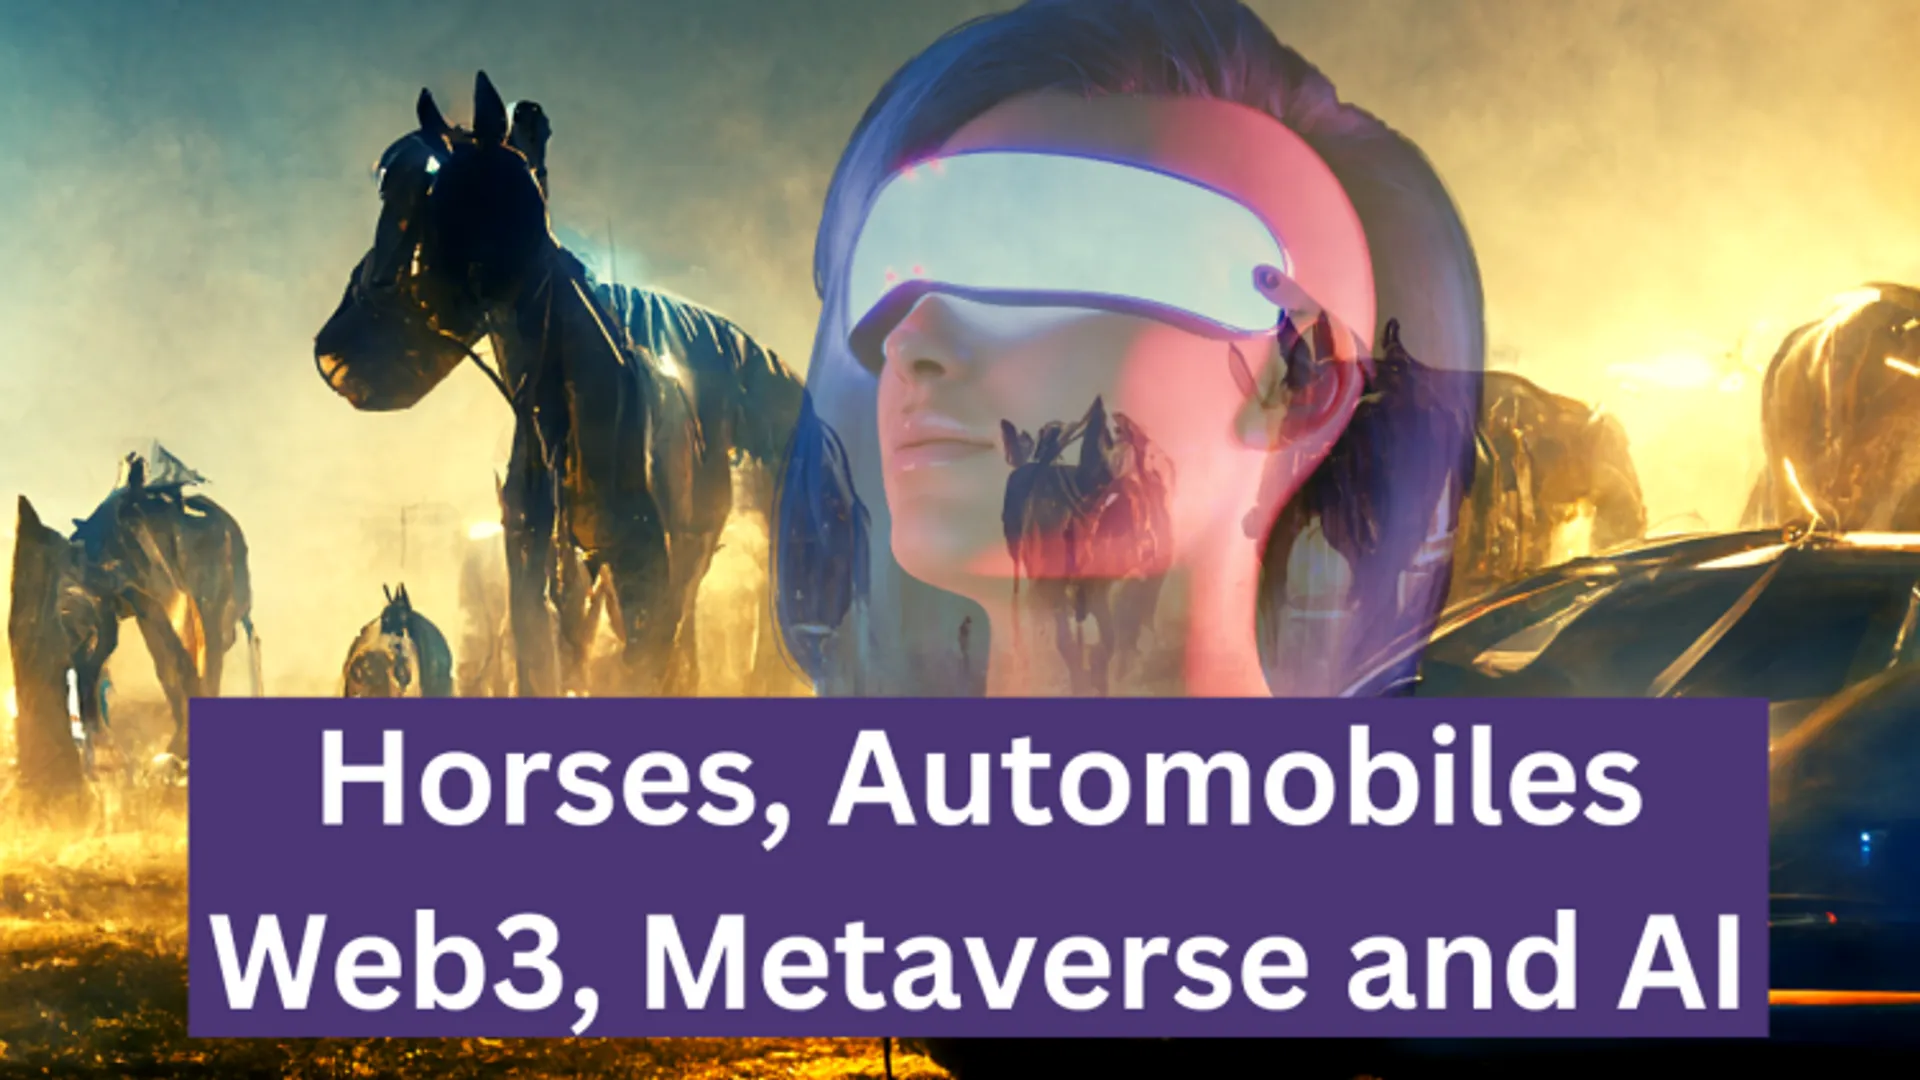 Curious about the societal shift from horse and buggies to cars? Today's leap to web3 feels just as groundbreaking. Check out my deep dive: "FROM HORSES AND AUTOMOBILES TO WEB3, METAVERSE AND AI!"  https://www.linkedin.com/pulse/from-horses-automobiles-web3-metaverses-mitch-jackson-esq-/.

Impressed or intrigued?

For a front-row view of web3 pioneers reshaping the digital frontier, I invite you to explore: https://onchainmonkey.com and https://metagood.com 